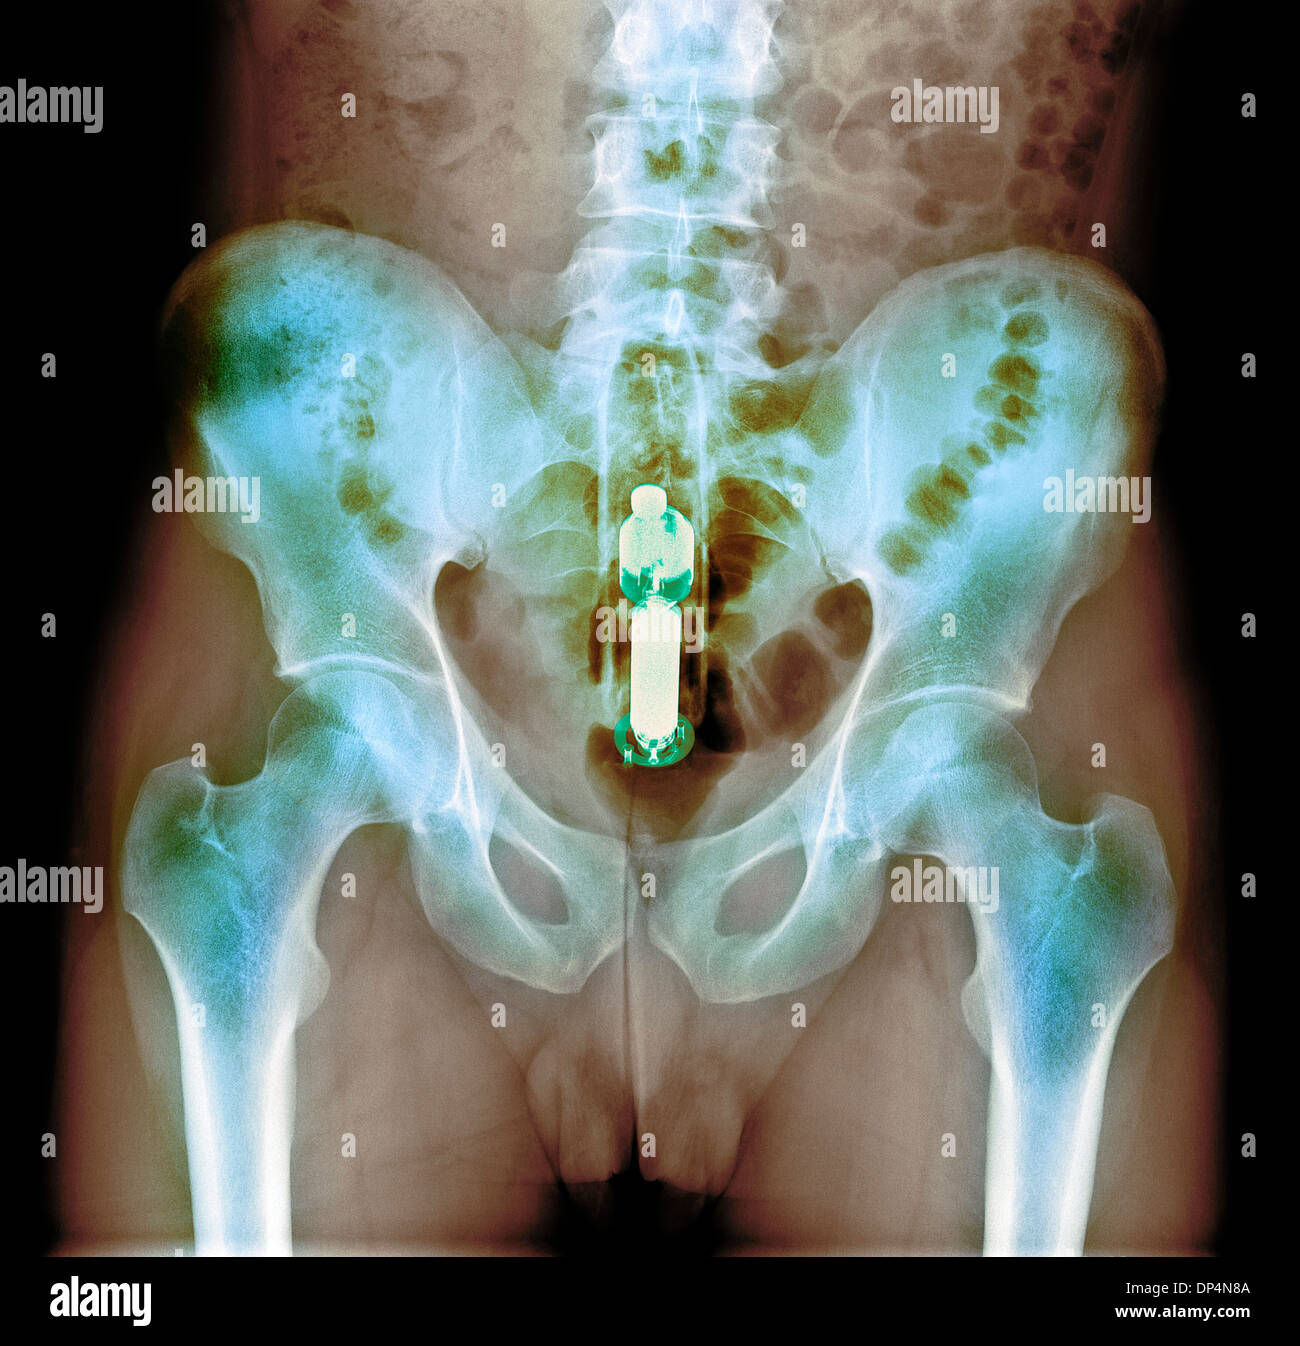 Foreign object in rectum, X-ray Stock Photo